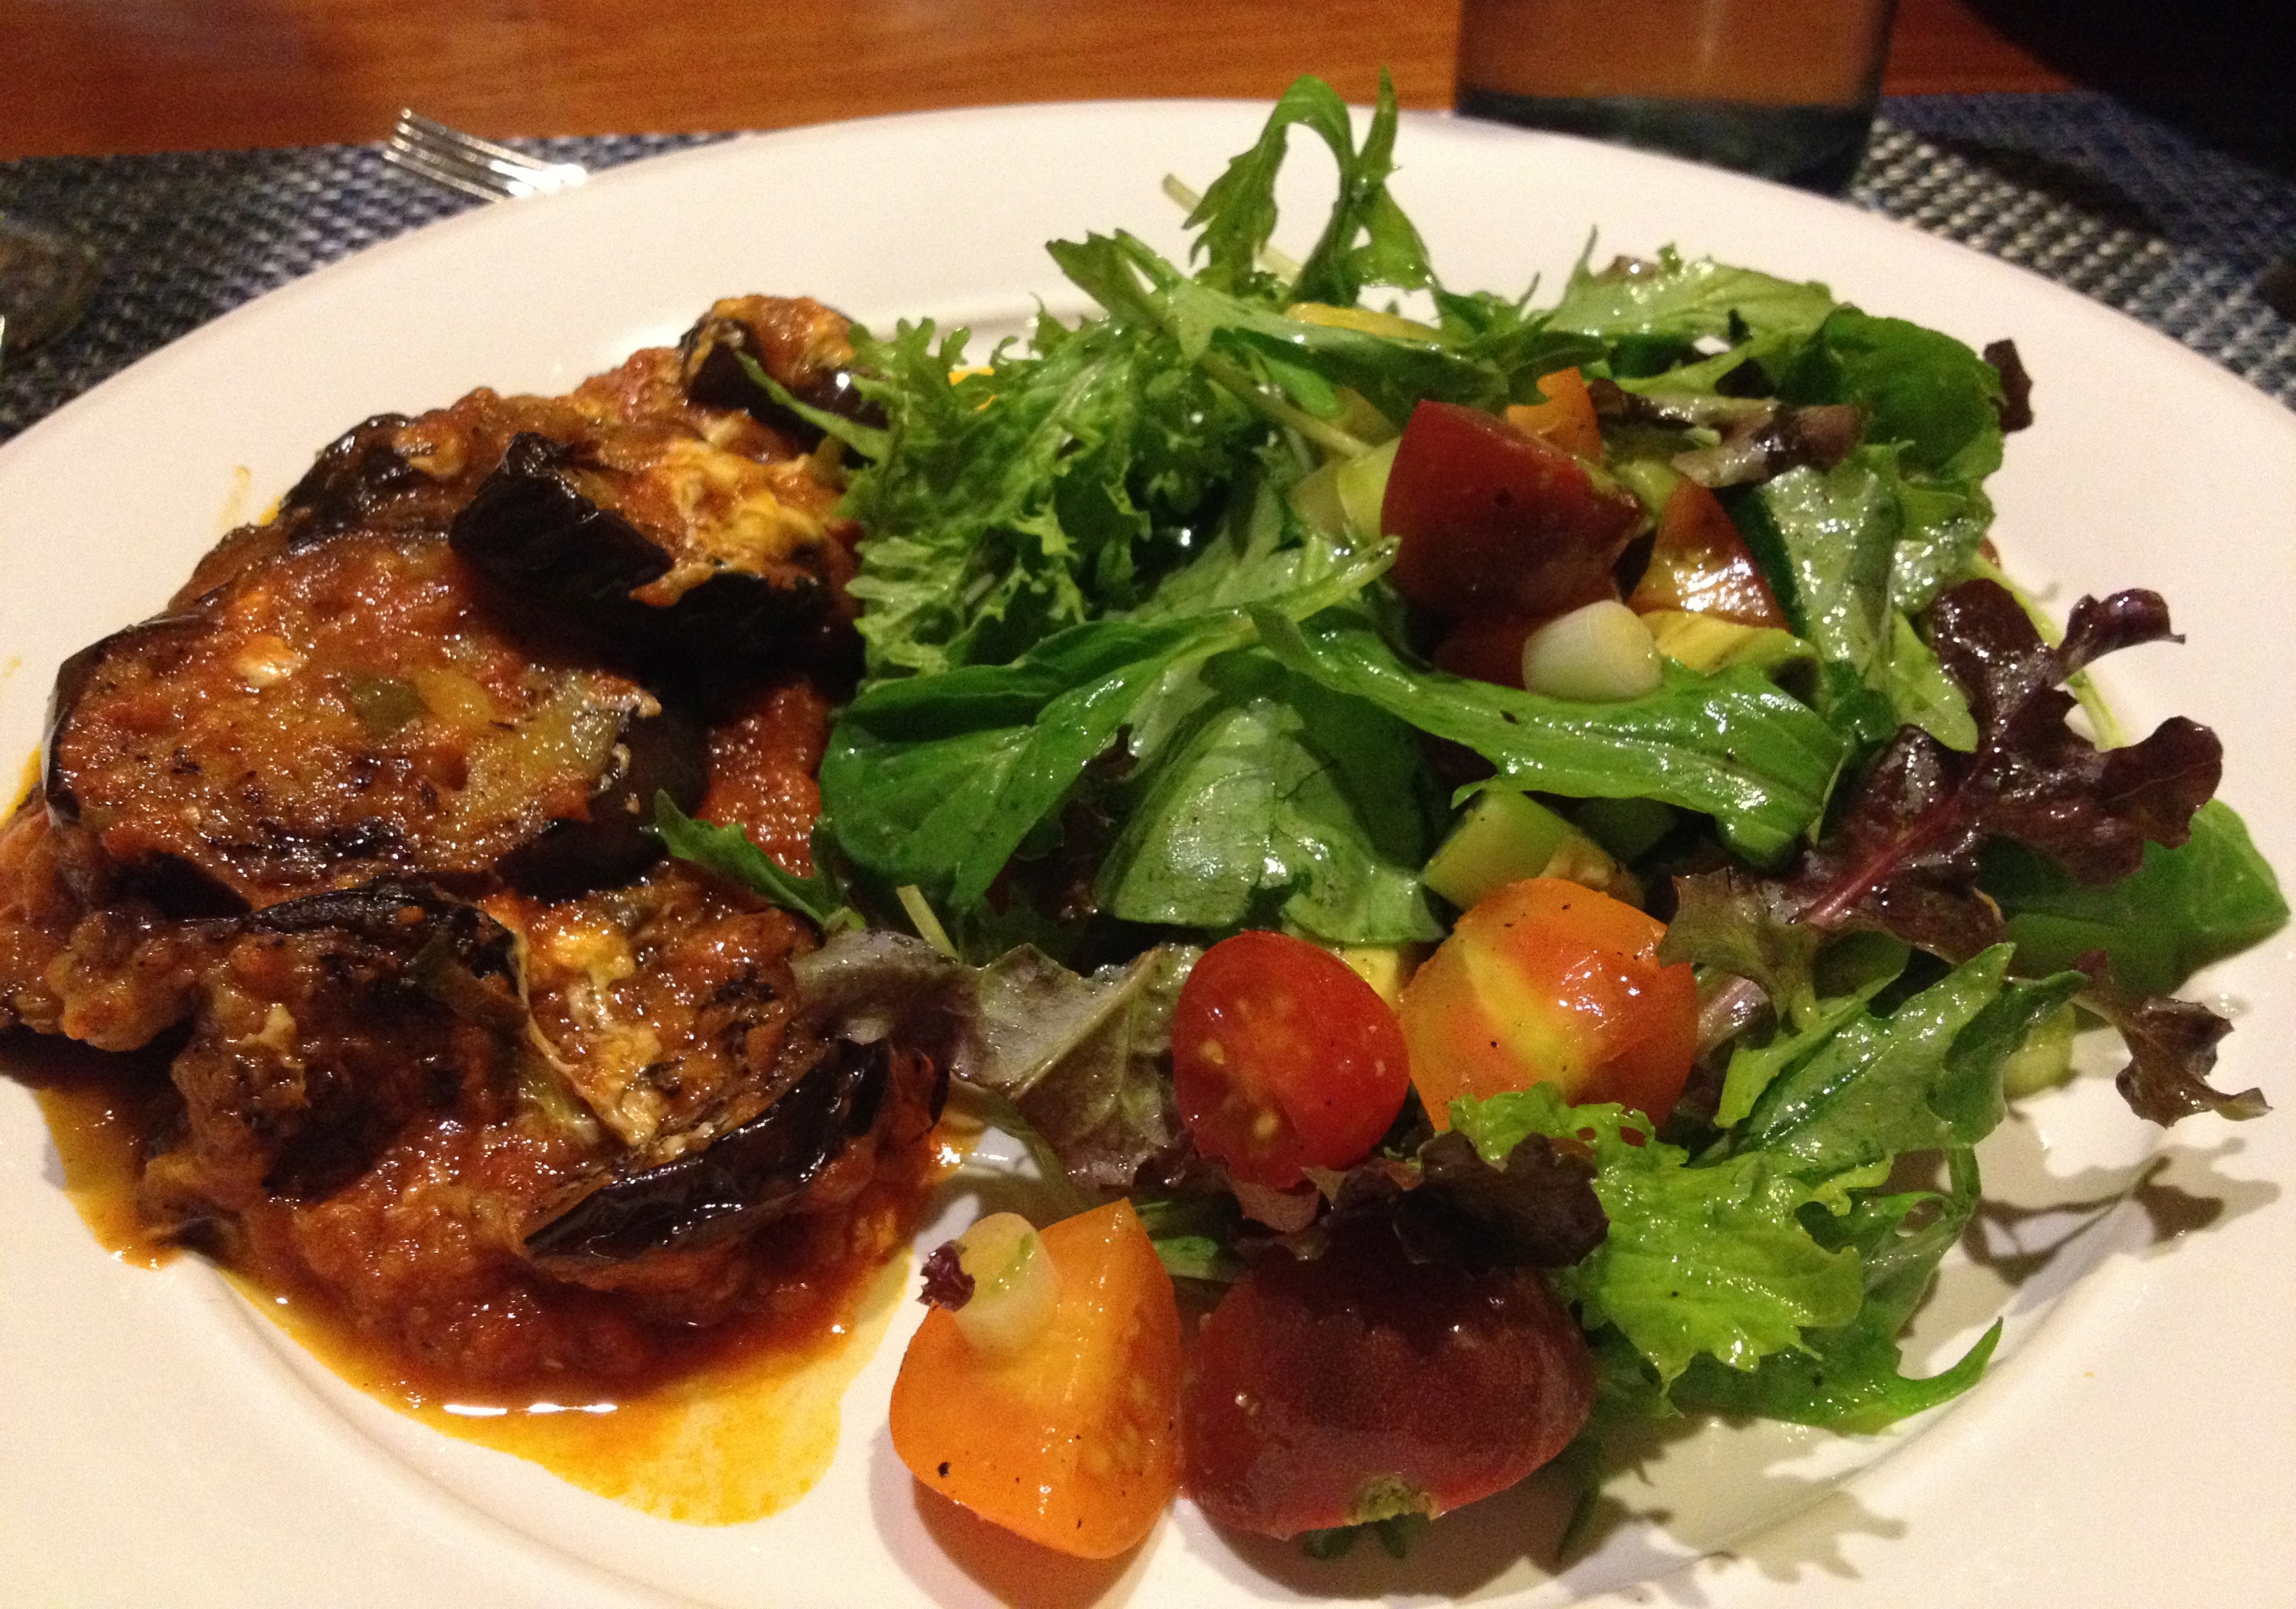 Eggplant Parmigiano and farm stand salad on a white plate.